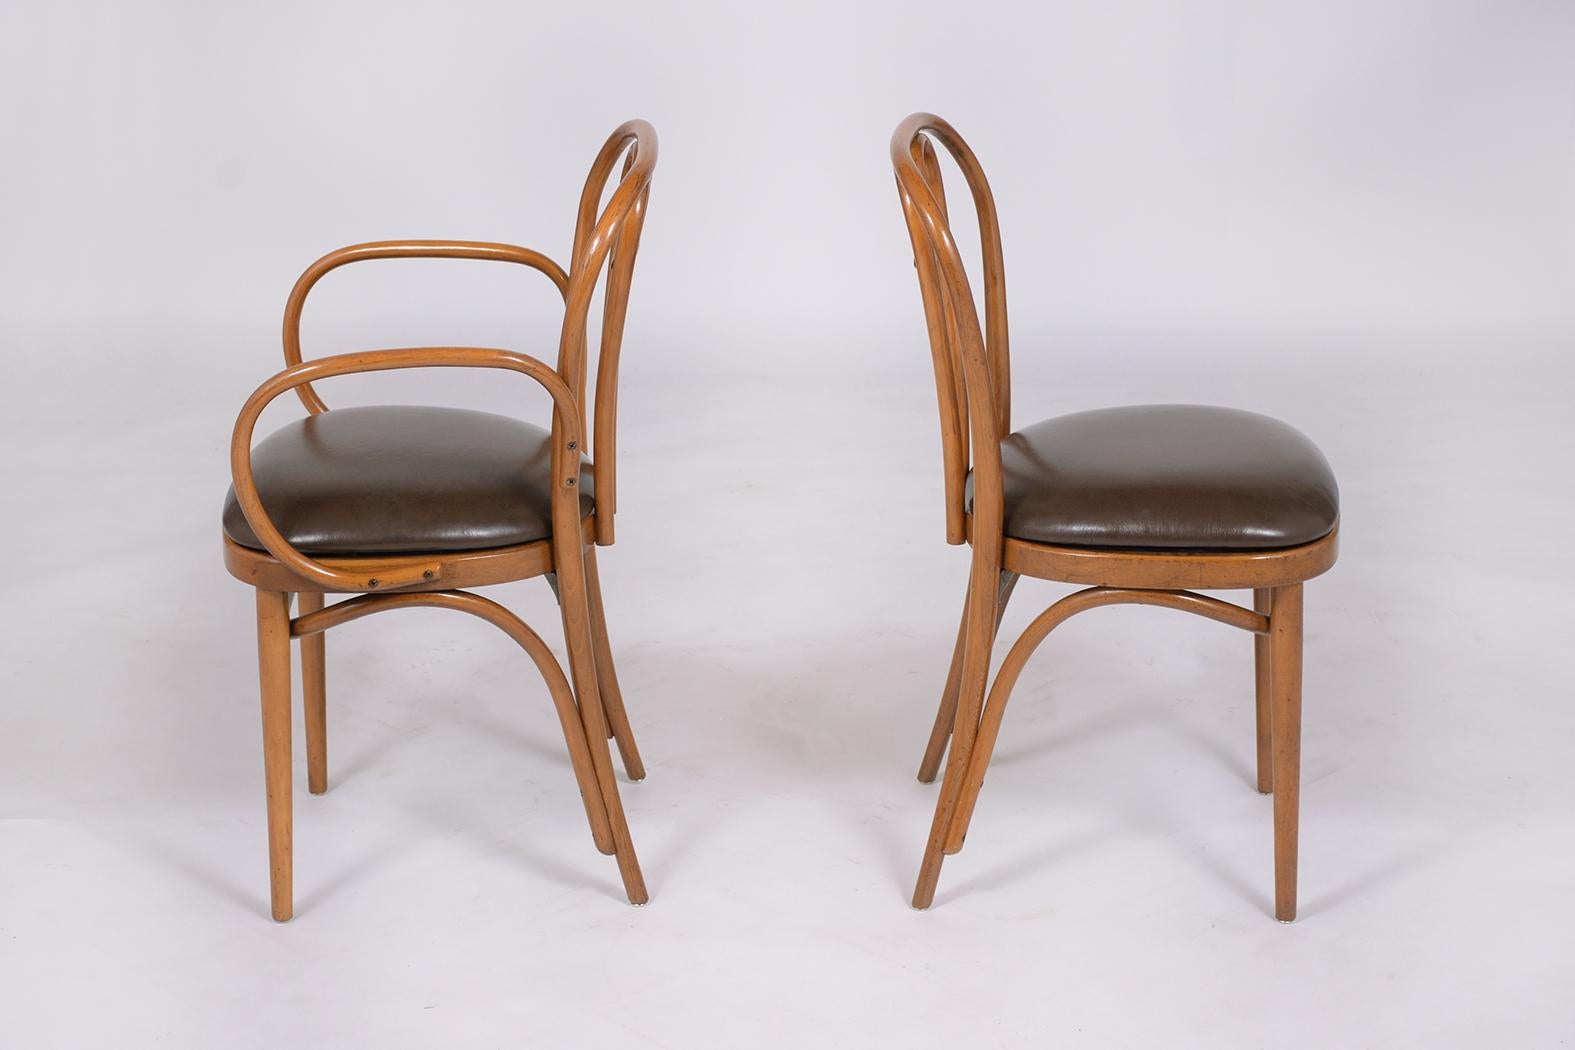 Art-Deco Thonet Bentwood Leather Dining Chairs with Walnut Finish - Set of Six For Sale 5